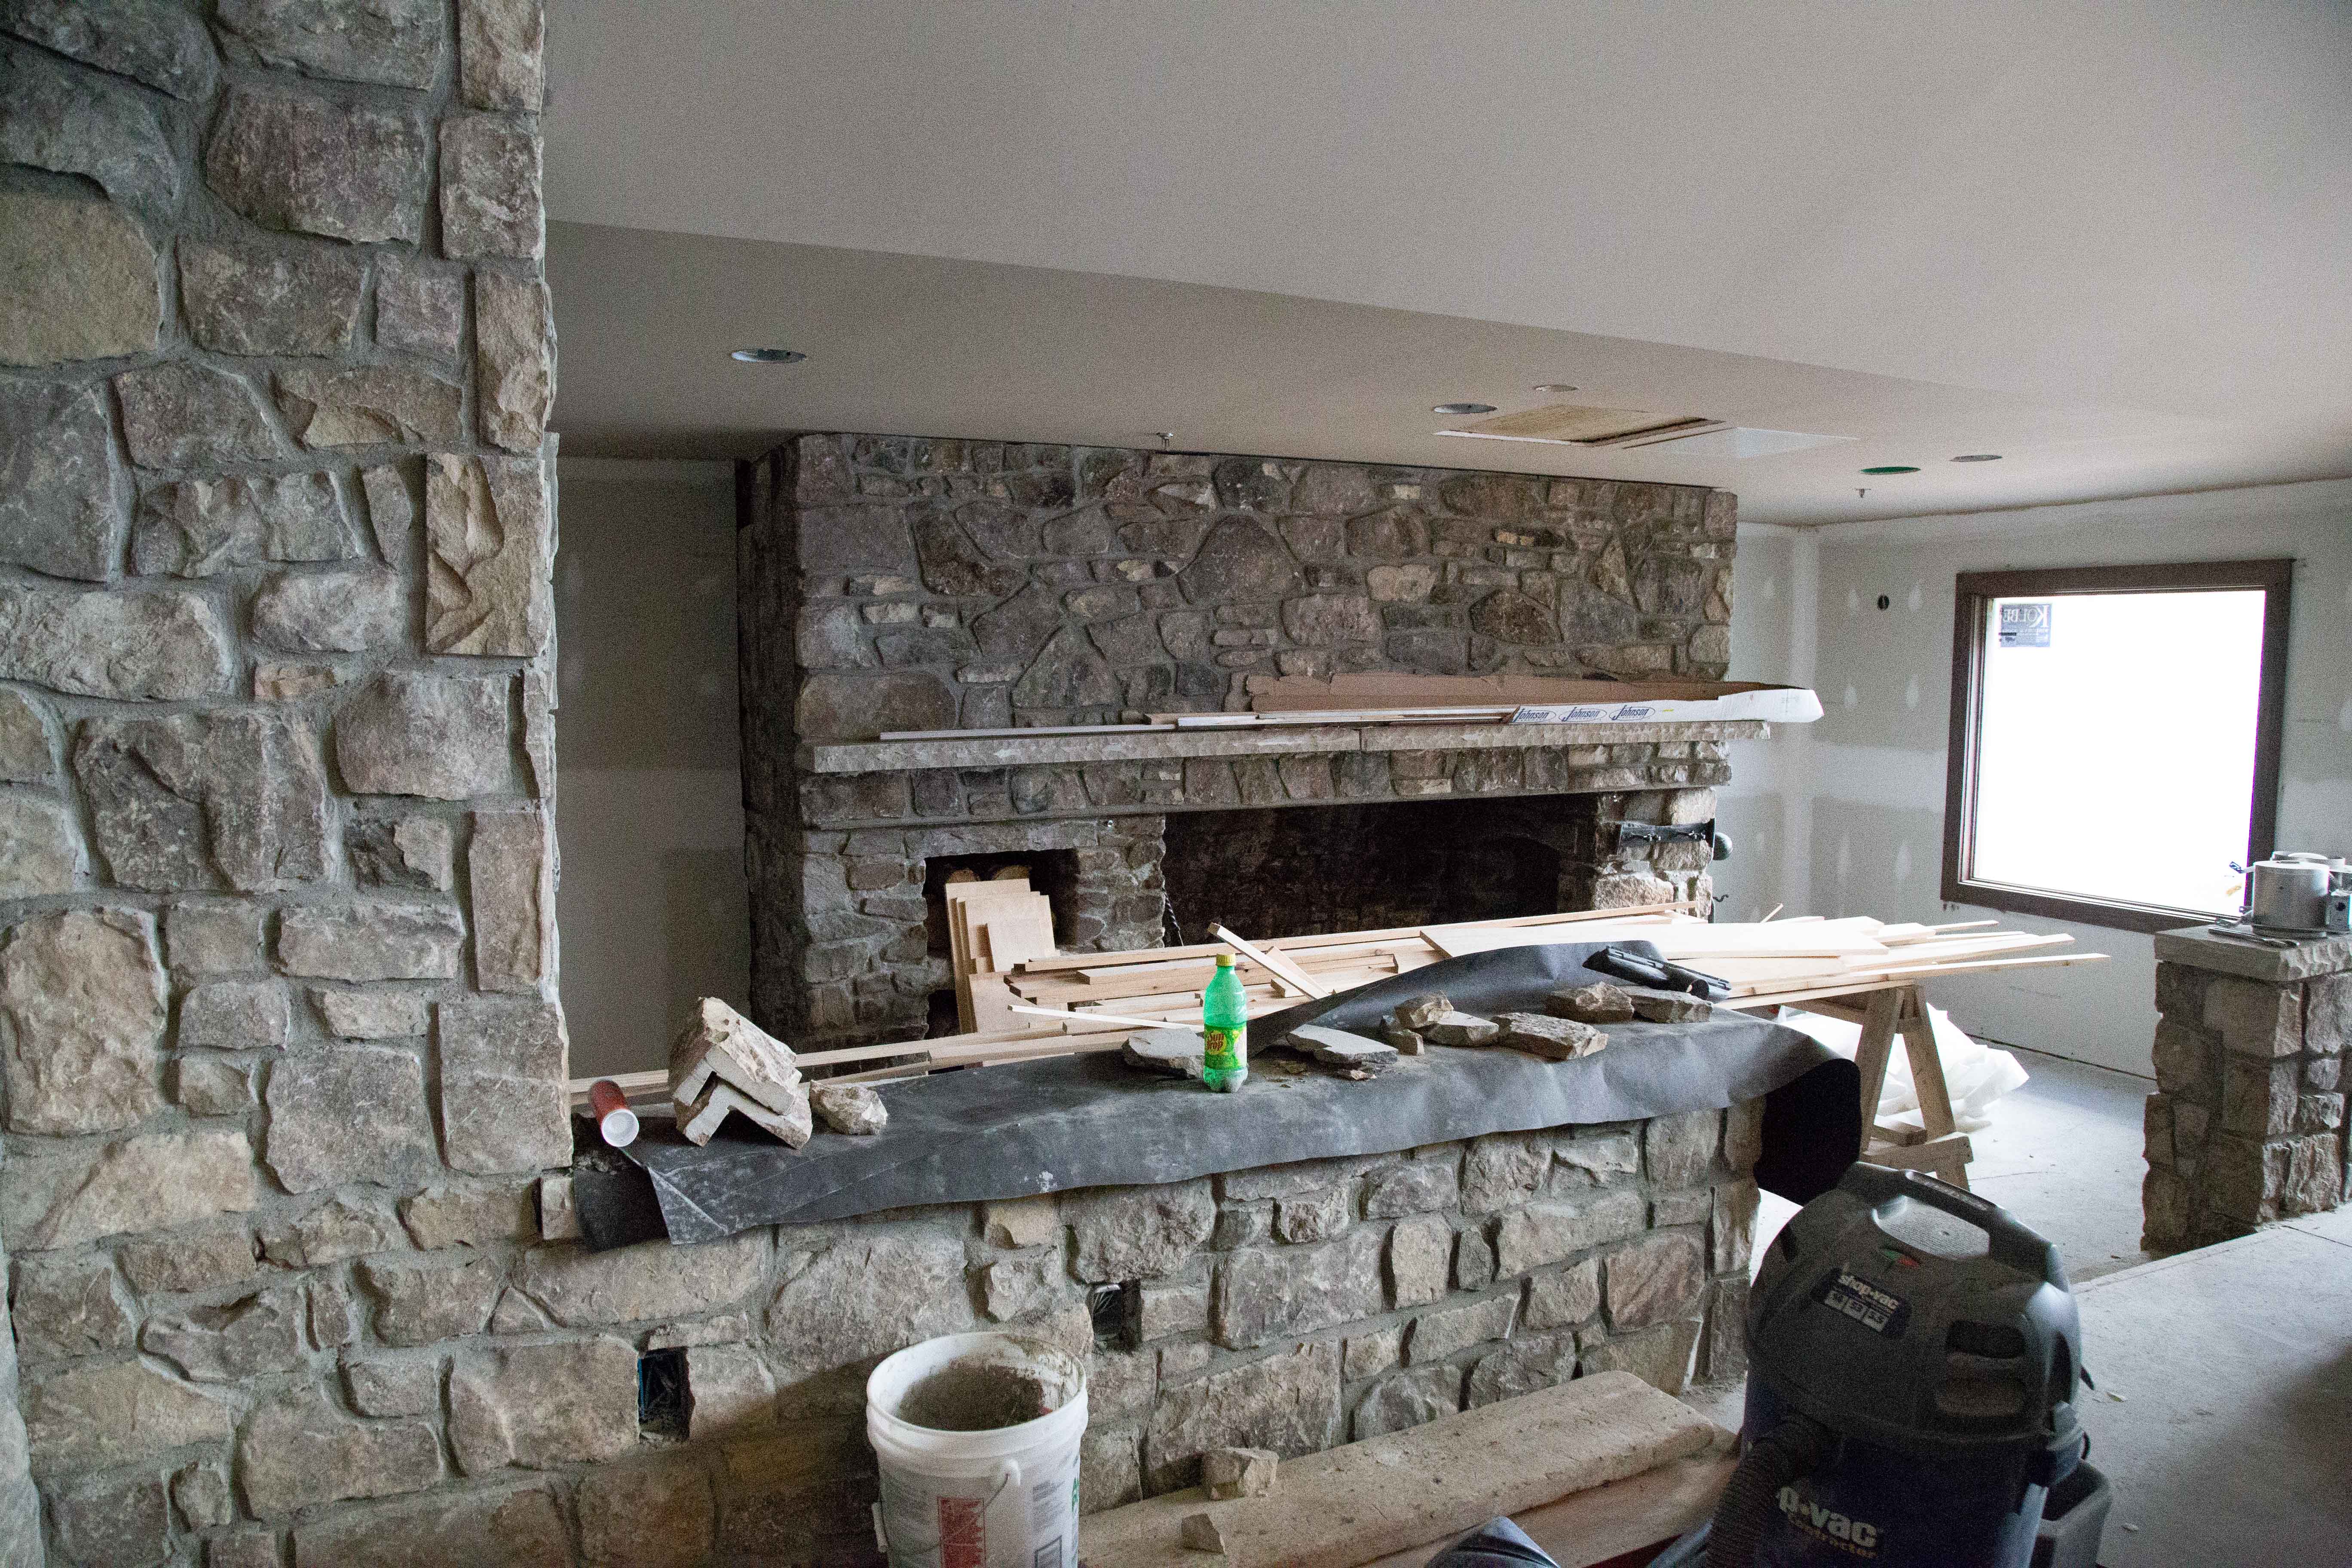 How to Mount Tv On Uneven Stone Fireplace Elegant Hound Ears Club Club Projects Archive